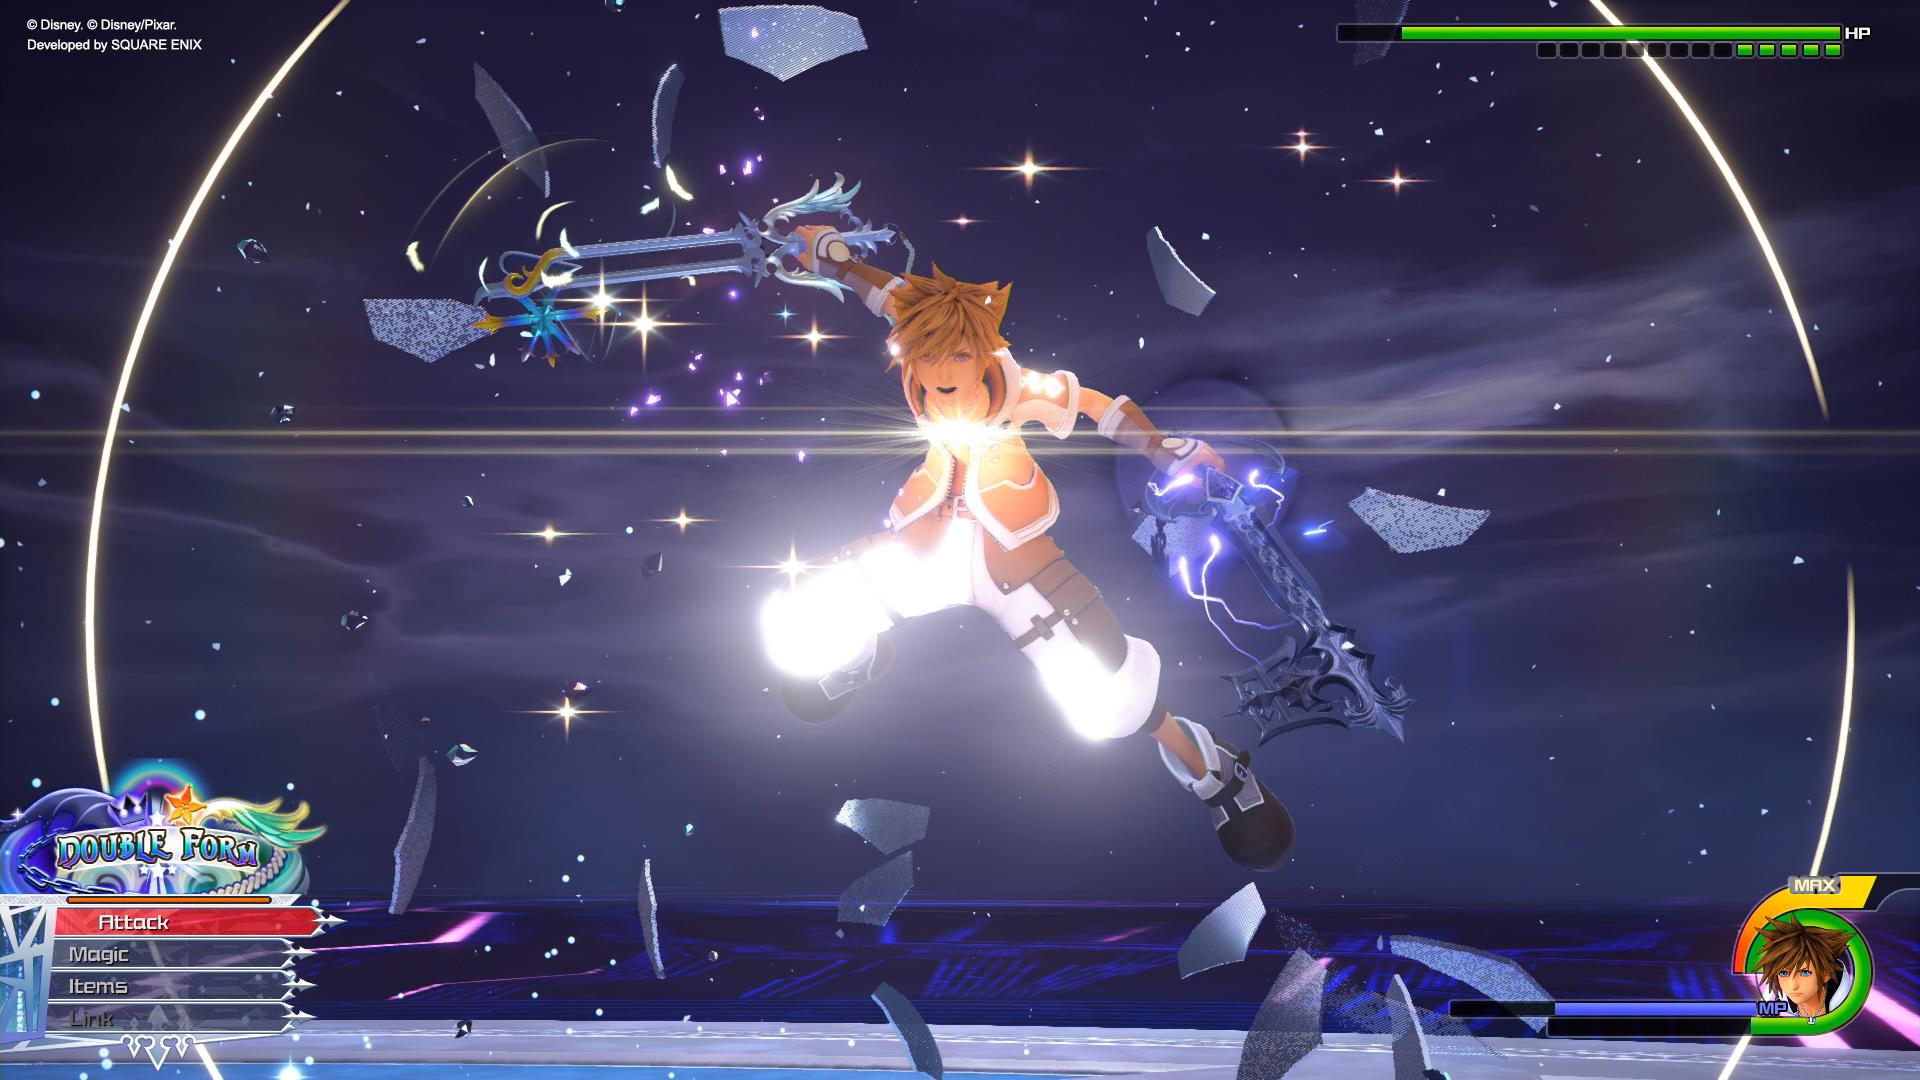 Update New Kingdom Hearts Iii Re Mind Screenshots Added To The Portal Site Double Form Slideshow Function Data Greeting And Premium Menu Info Added Translations Available Kingdom Hearts News Kh13